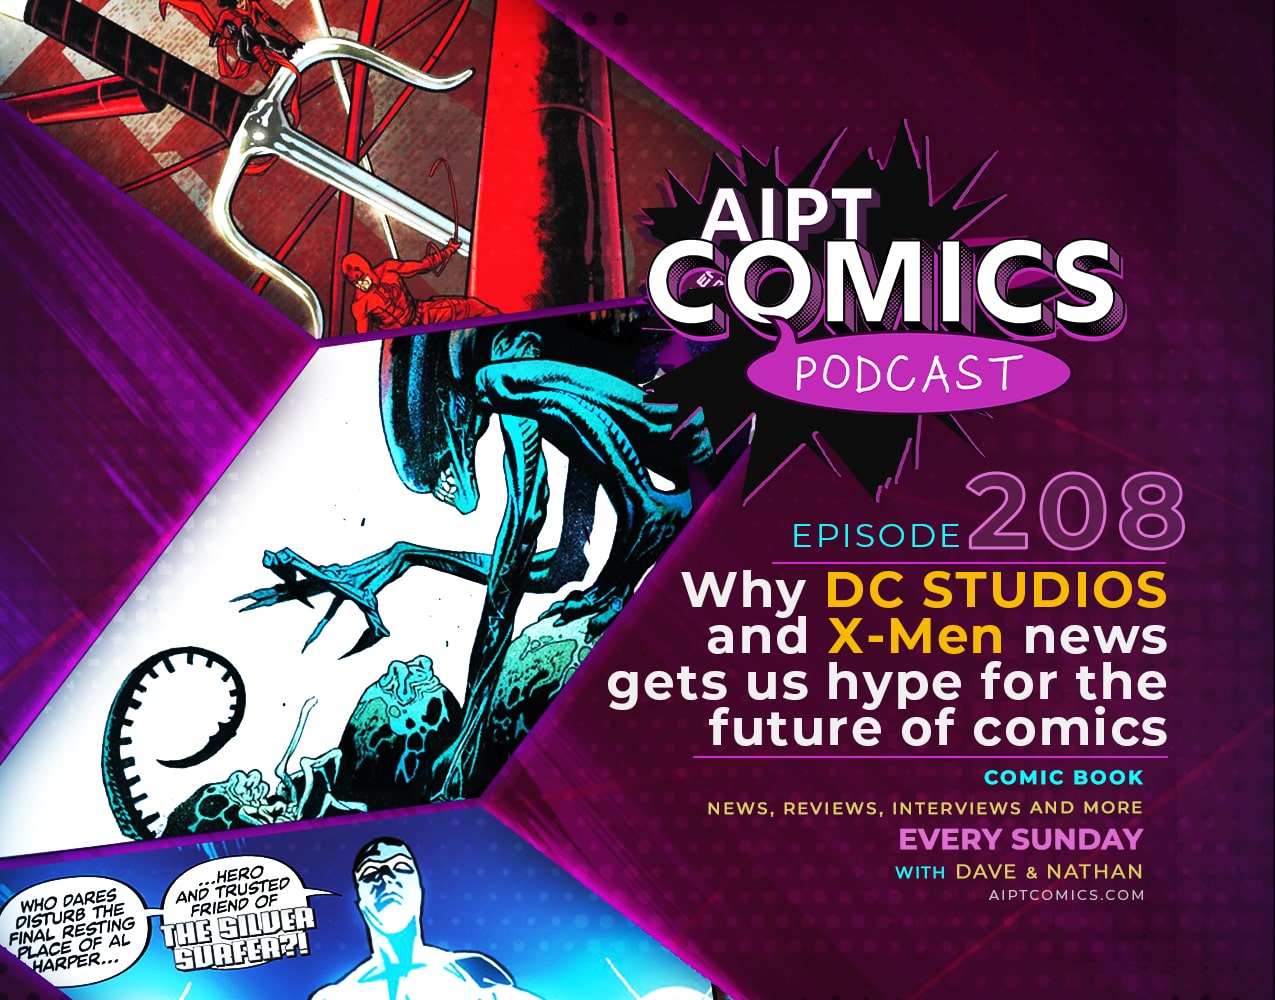 AIPT Comics Podcast episode 208: Why DC Studios and X-Men news gets us hype for the future of comics